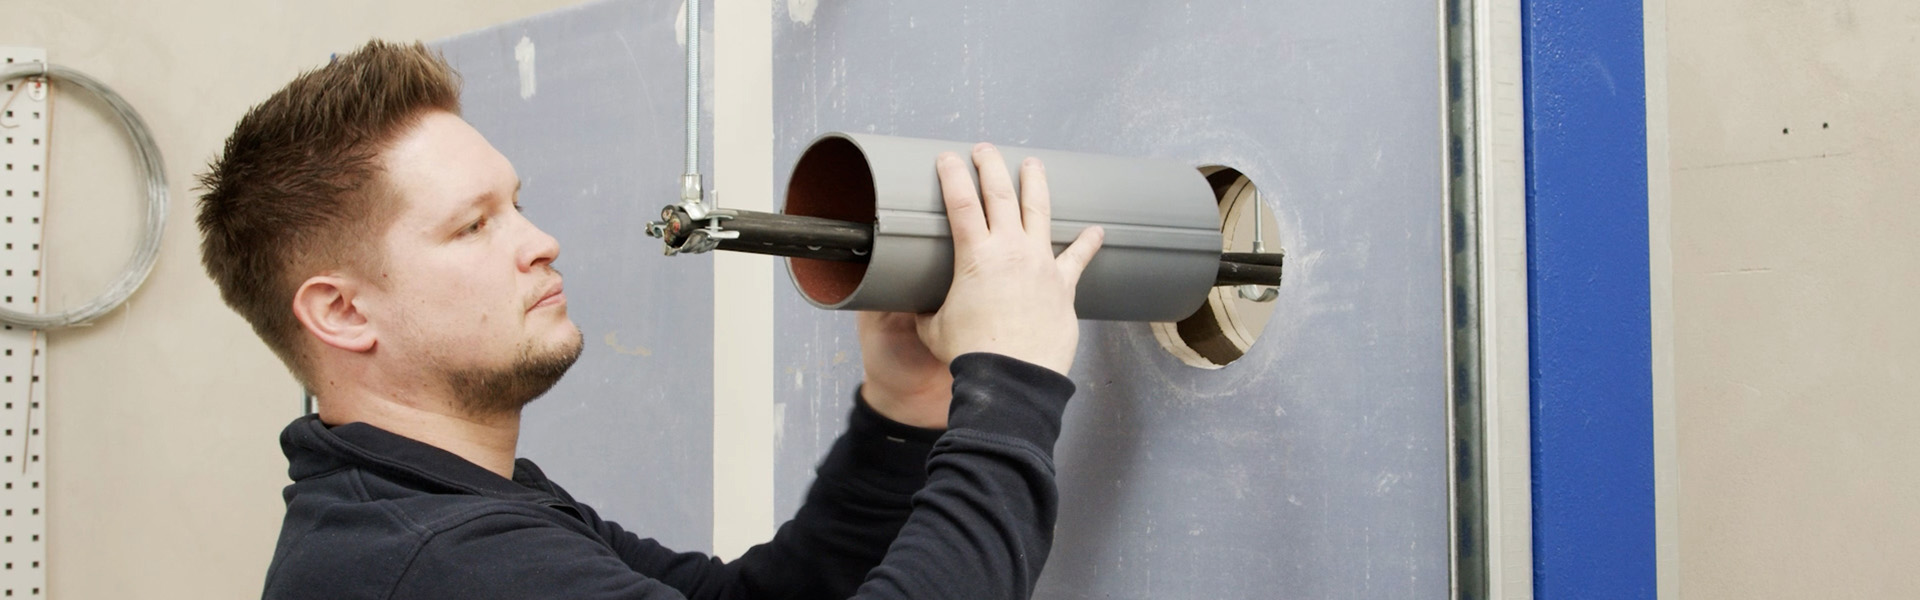 A craftsman installs a CT Cable Tube around electrical cables in a wall duct.